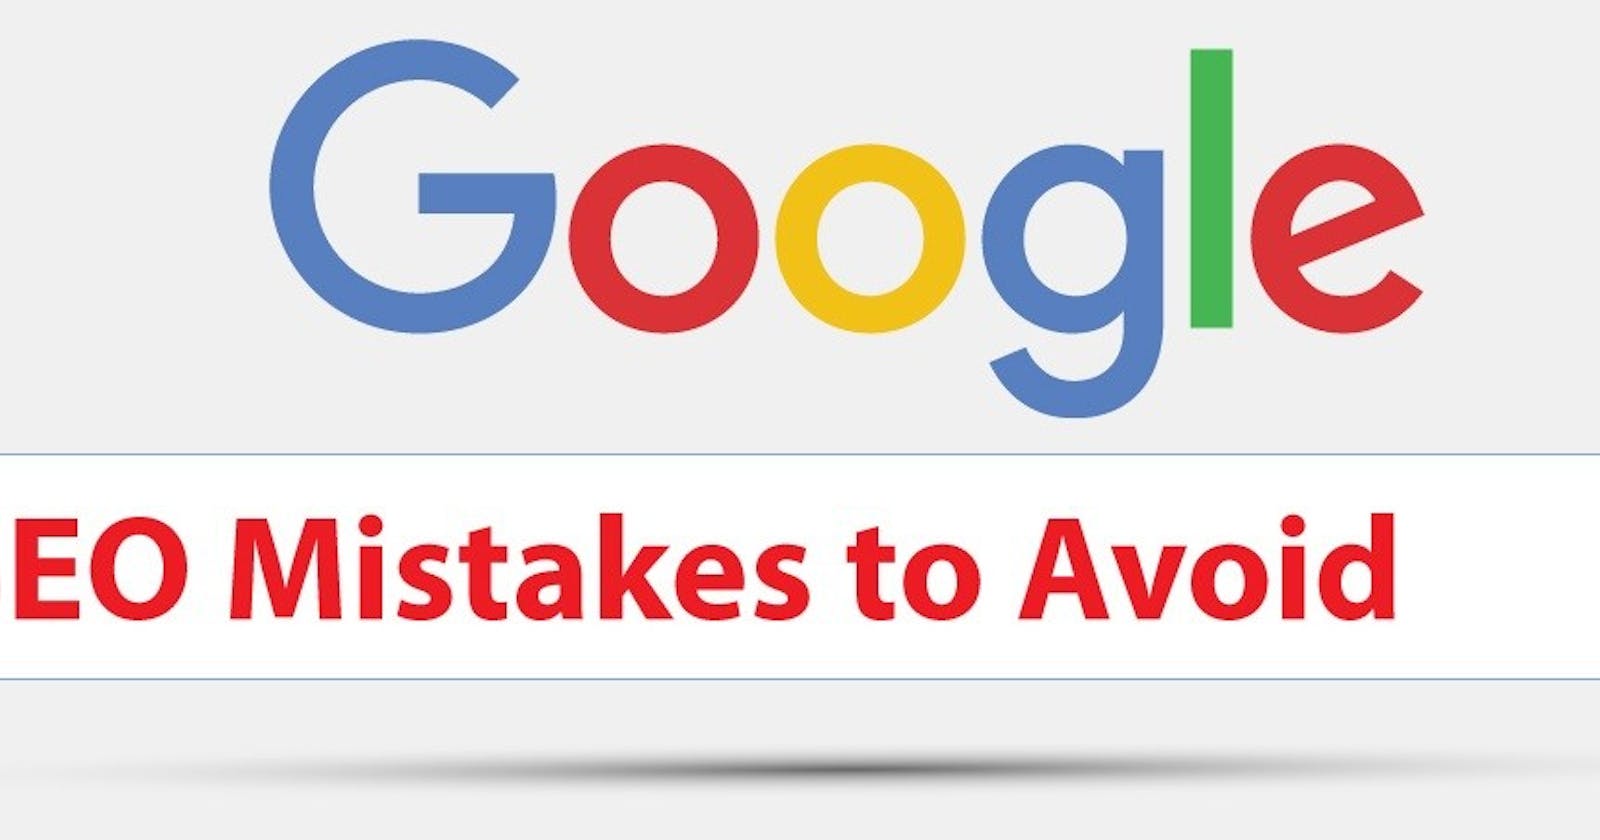 Crack the Code: 5 SEO Mistakes That Could Tank Your Rankings